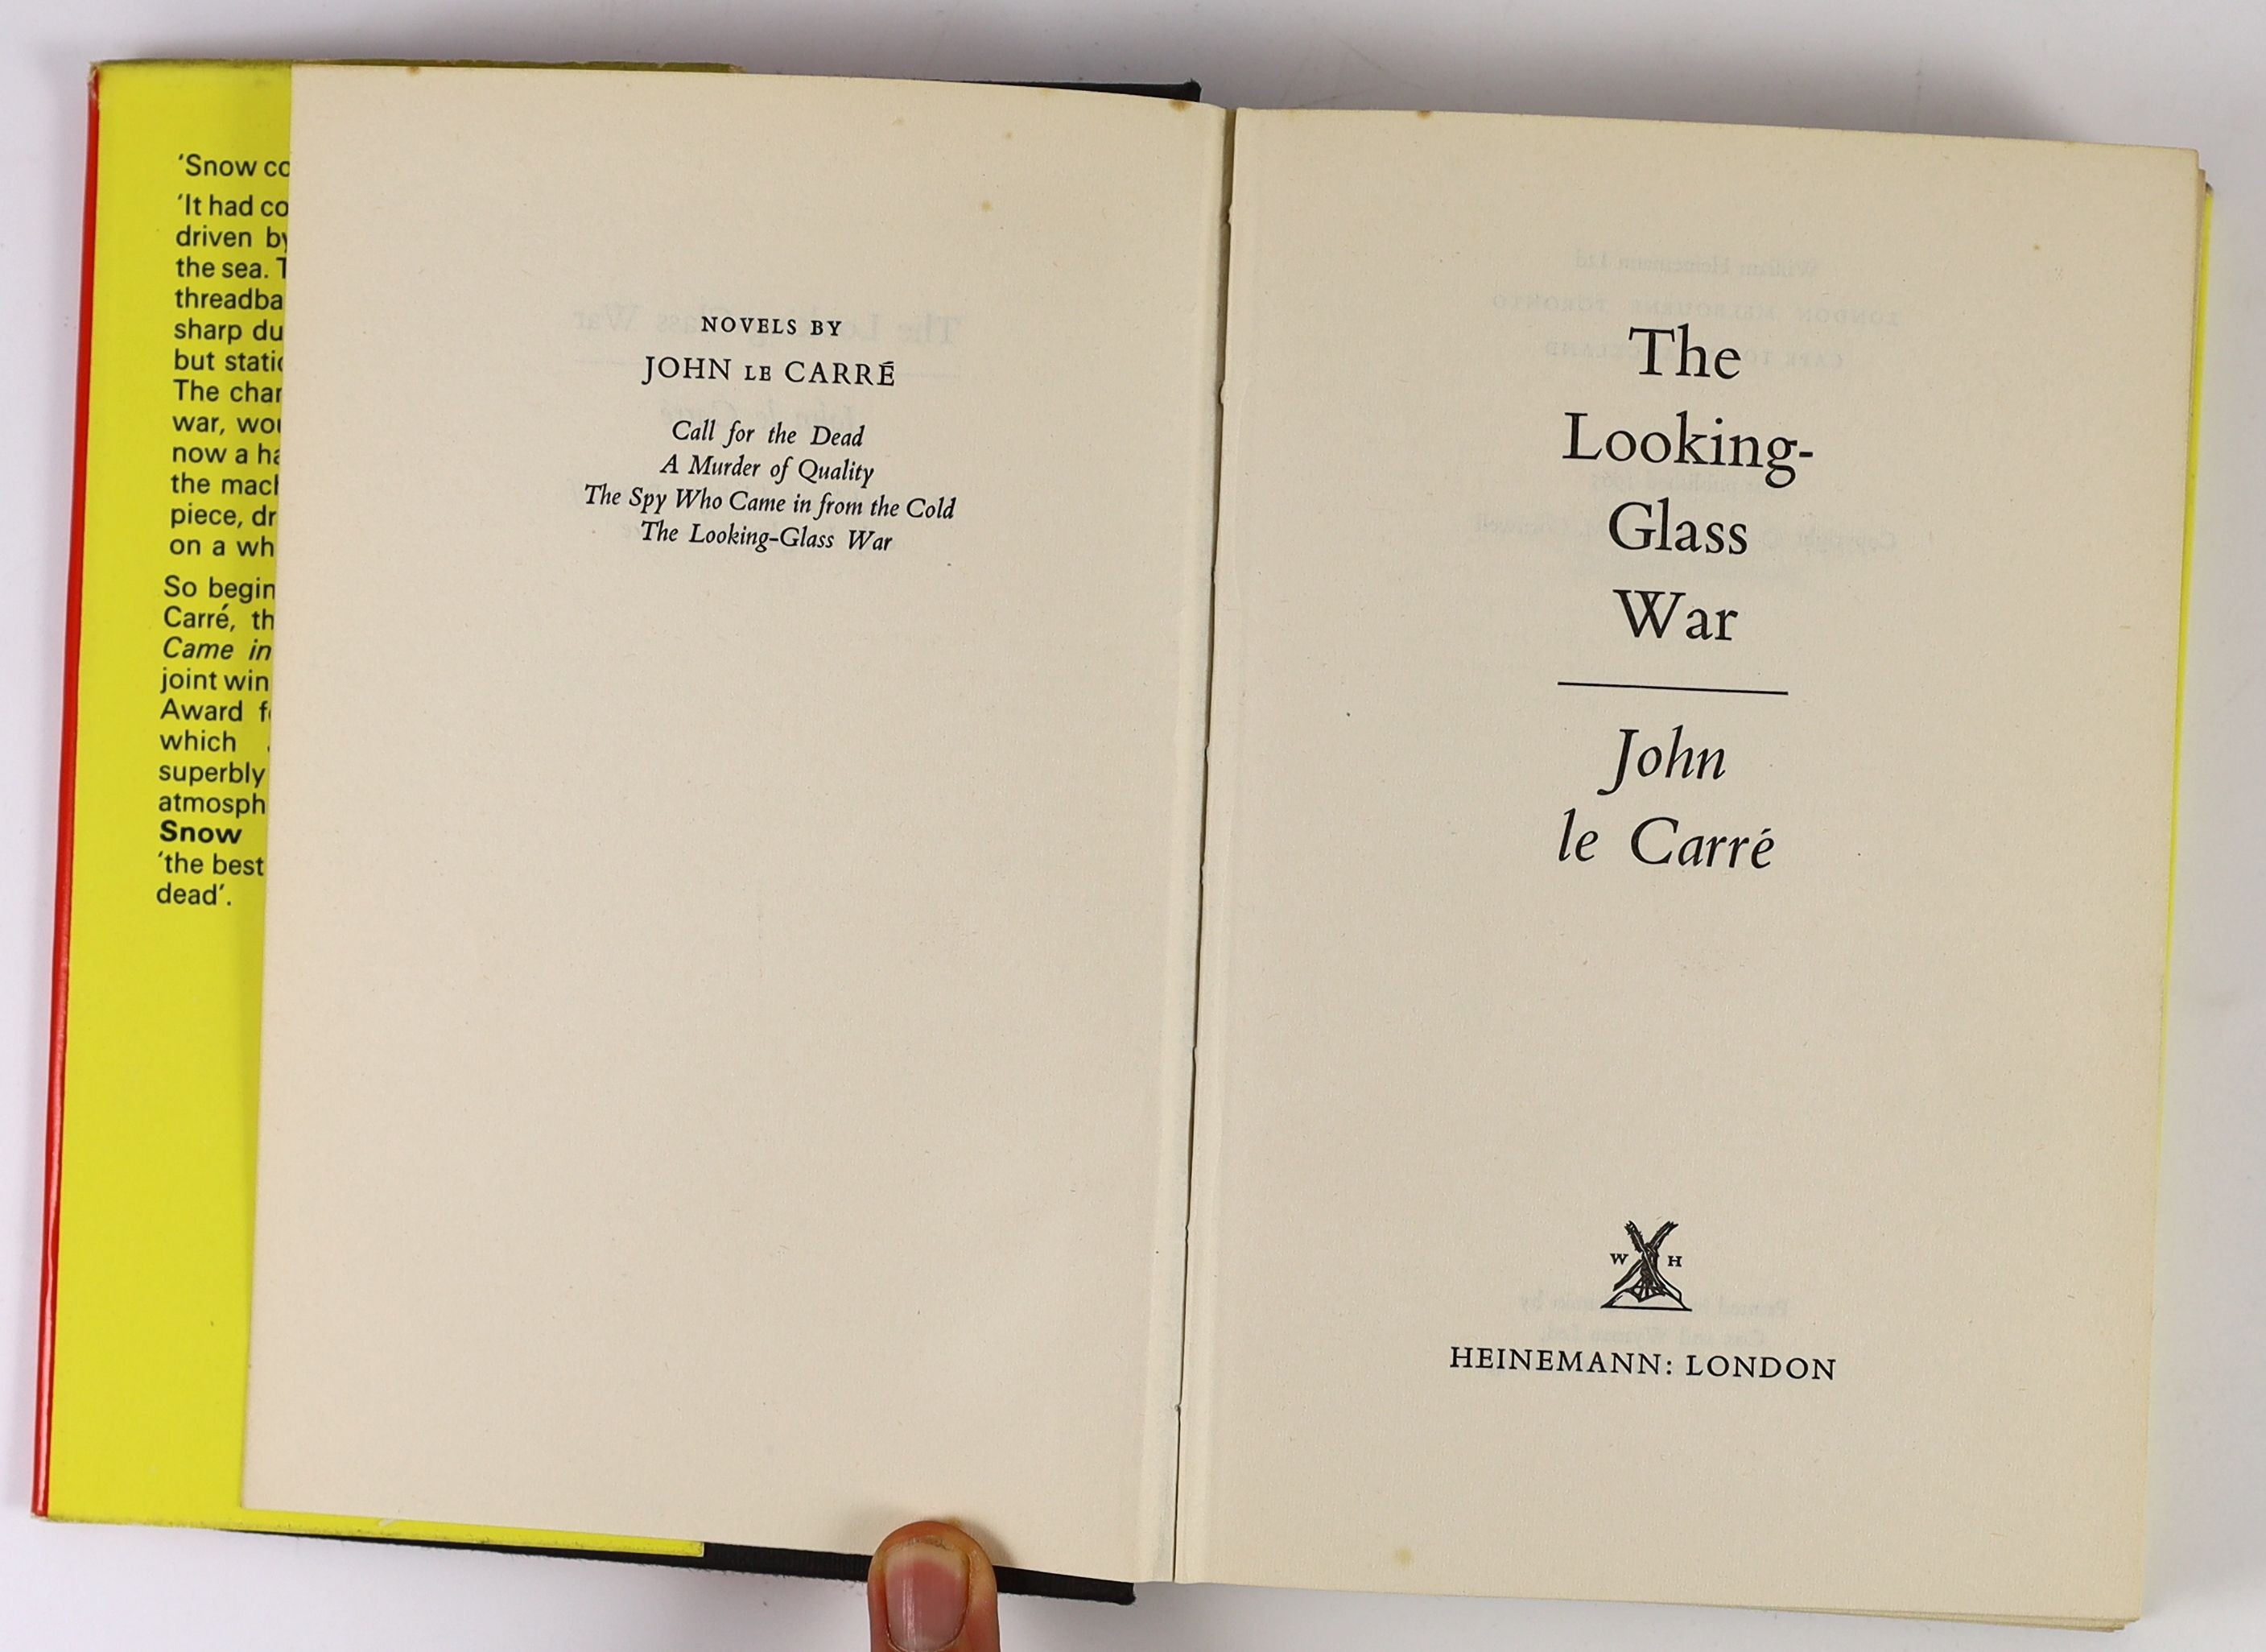 Le Carre, John - The Looking-Glass War, 1st edition, in unclipped d/j, spine sunned, Heinemann, London, 1965